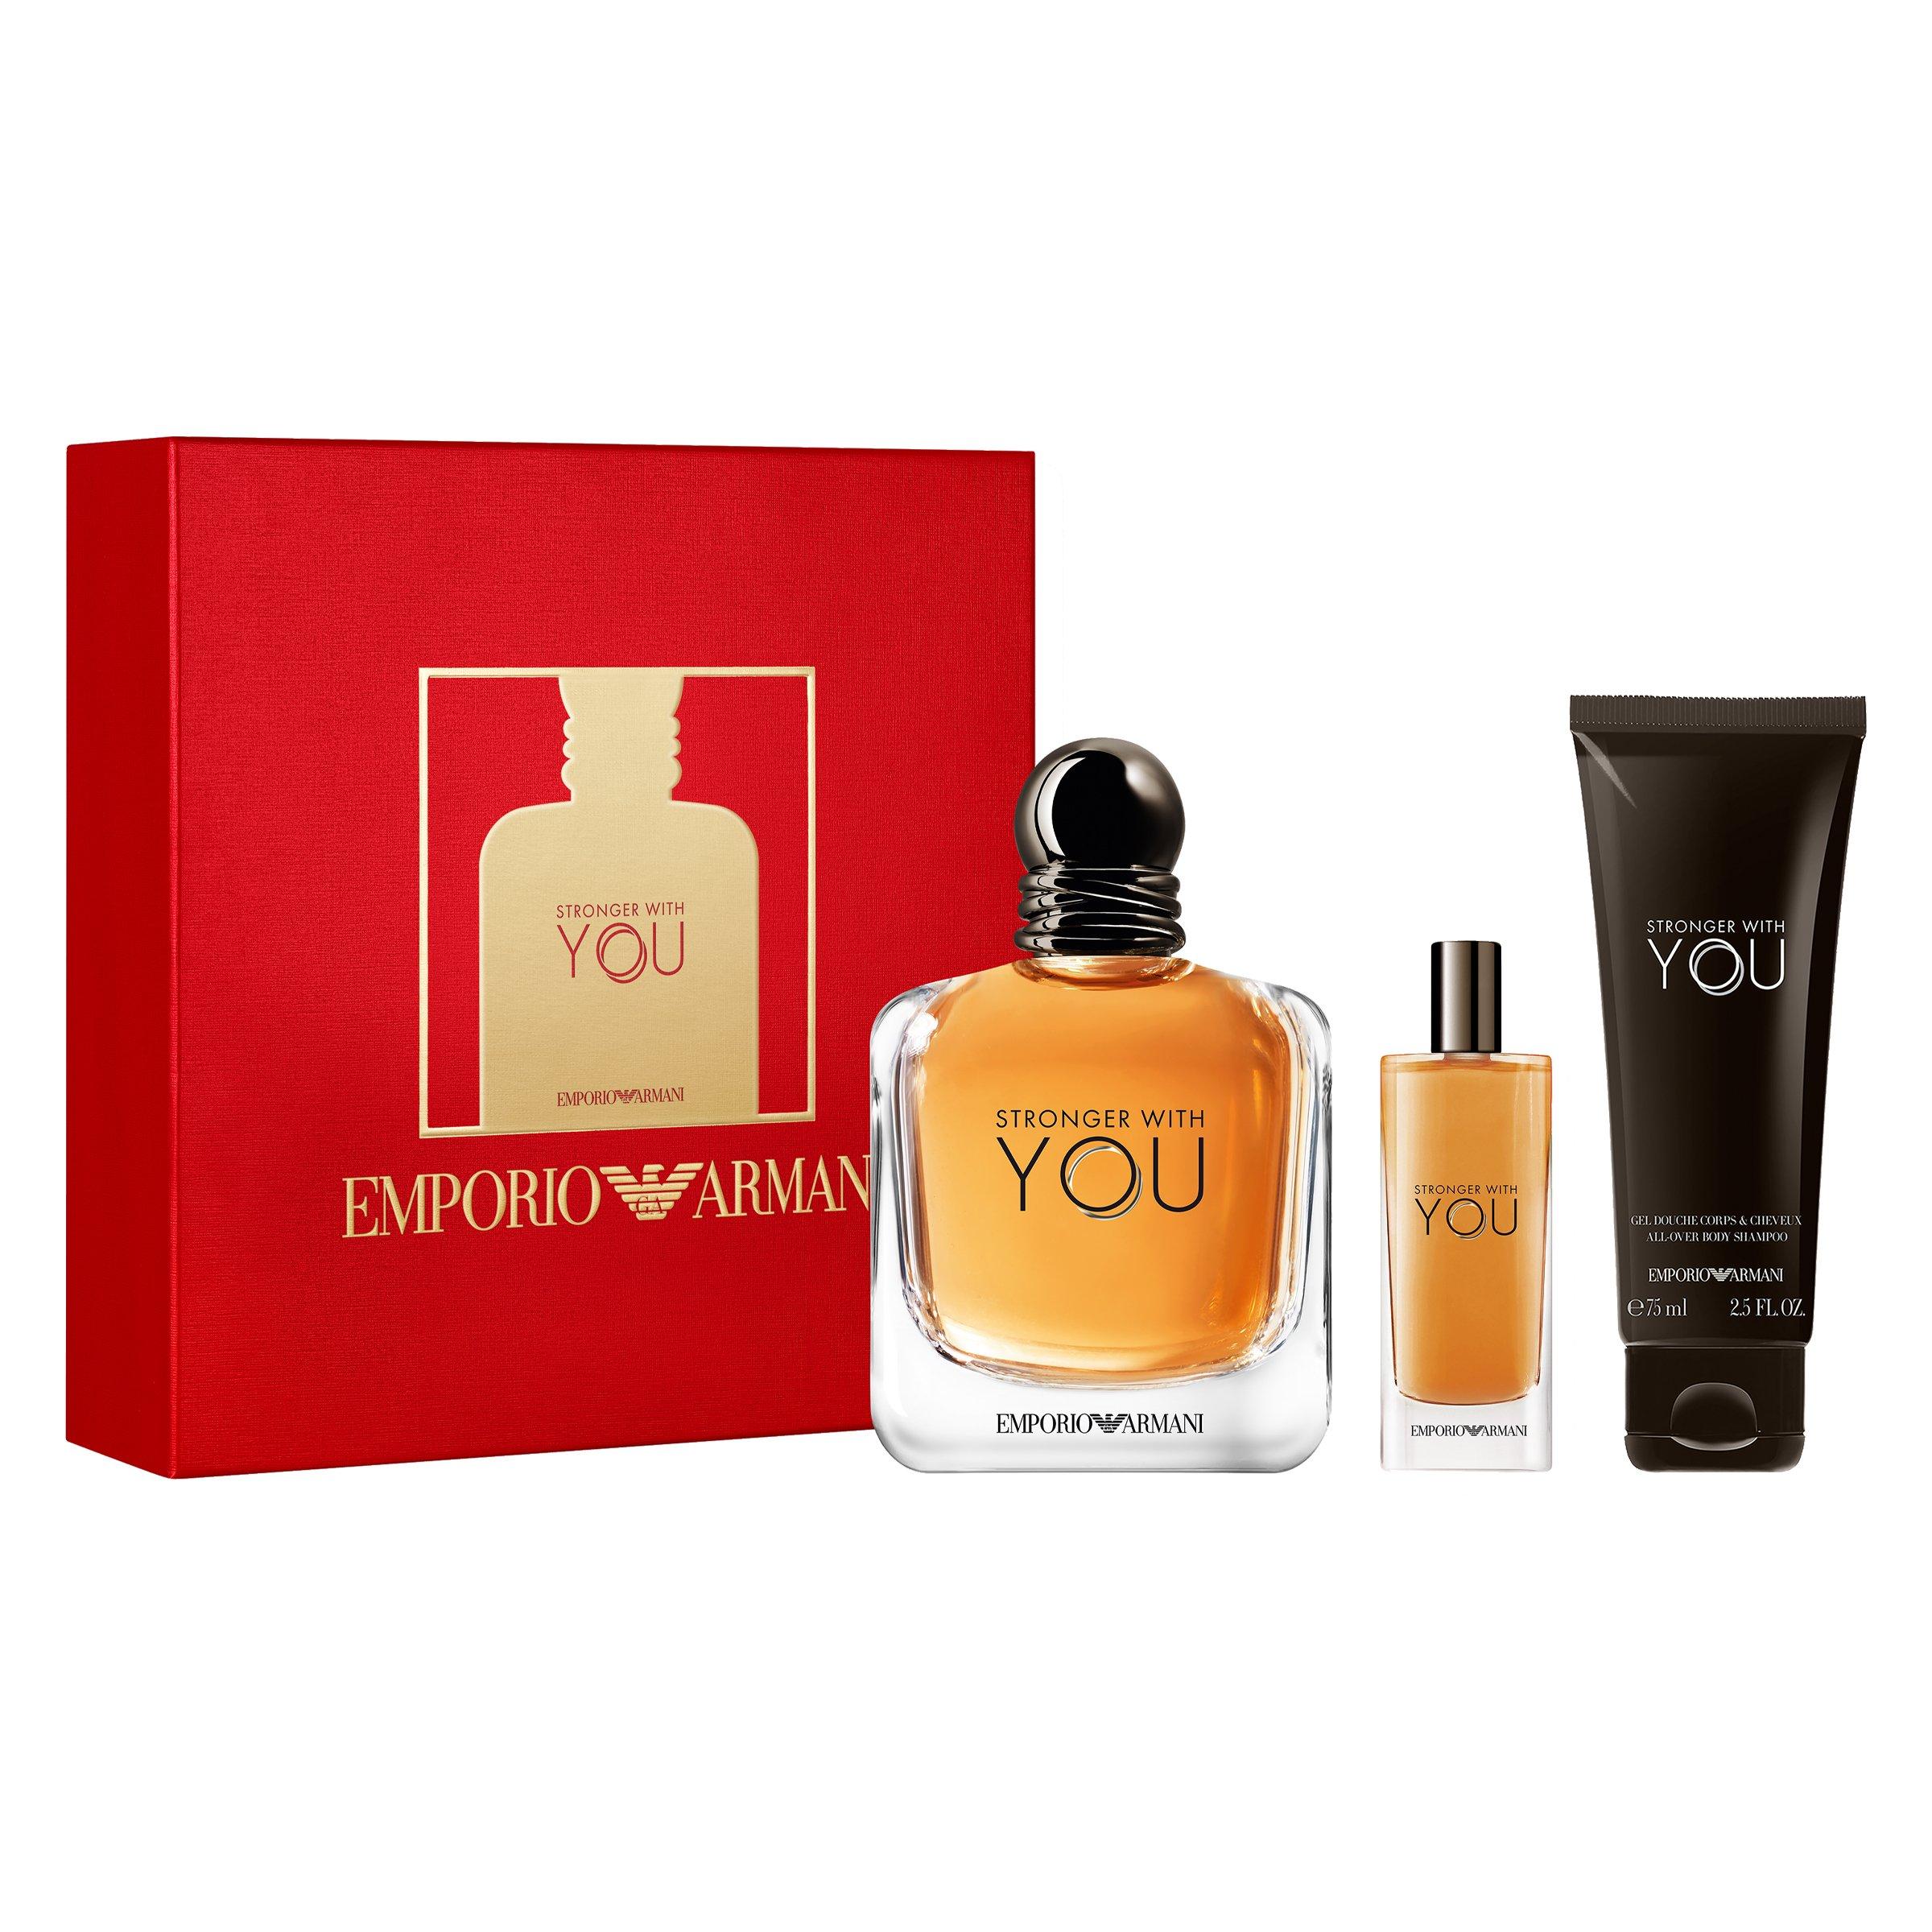 Parfum Auto - Stronger with you